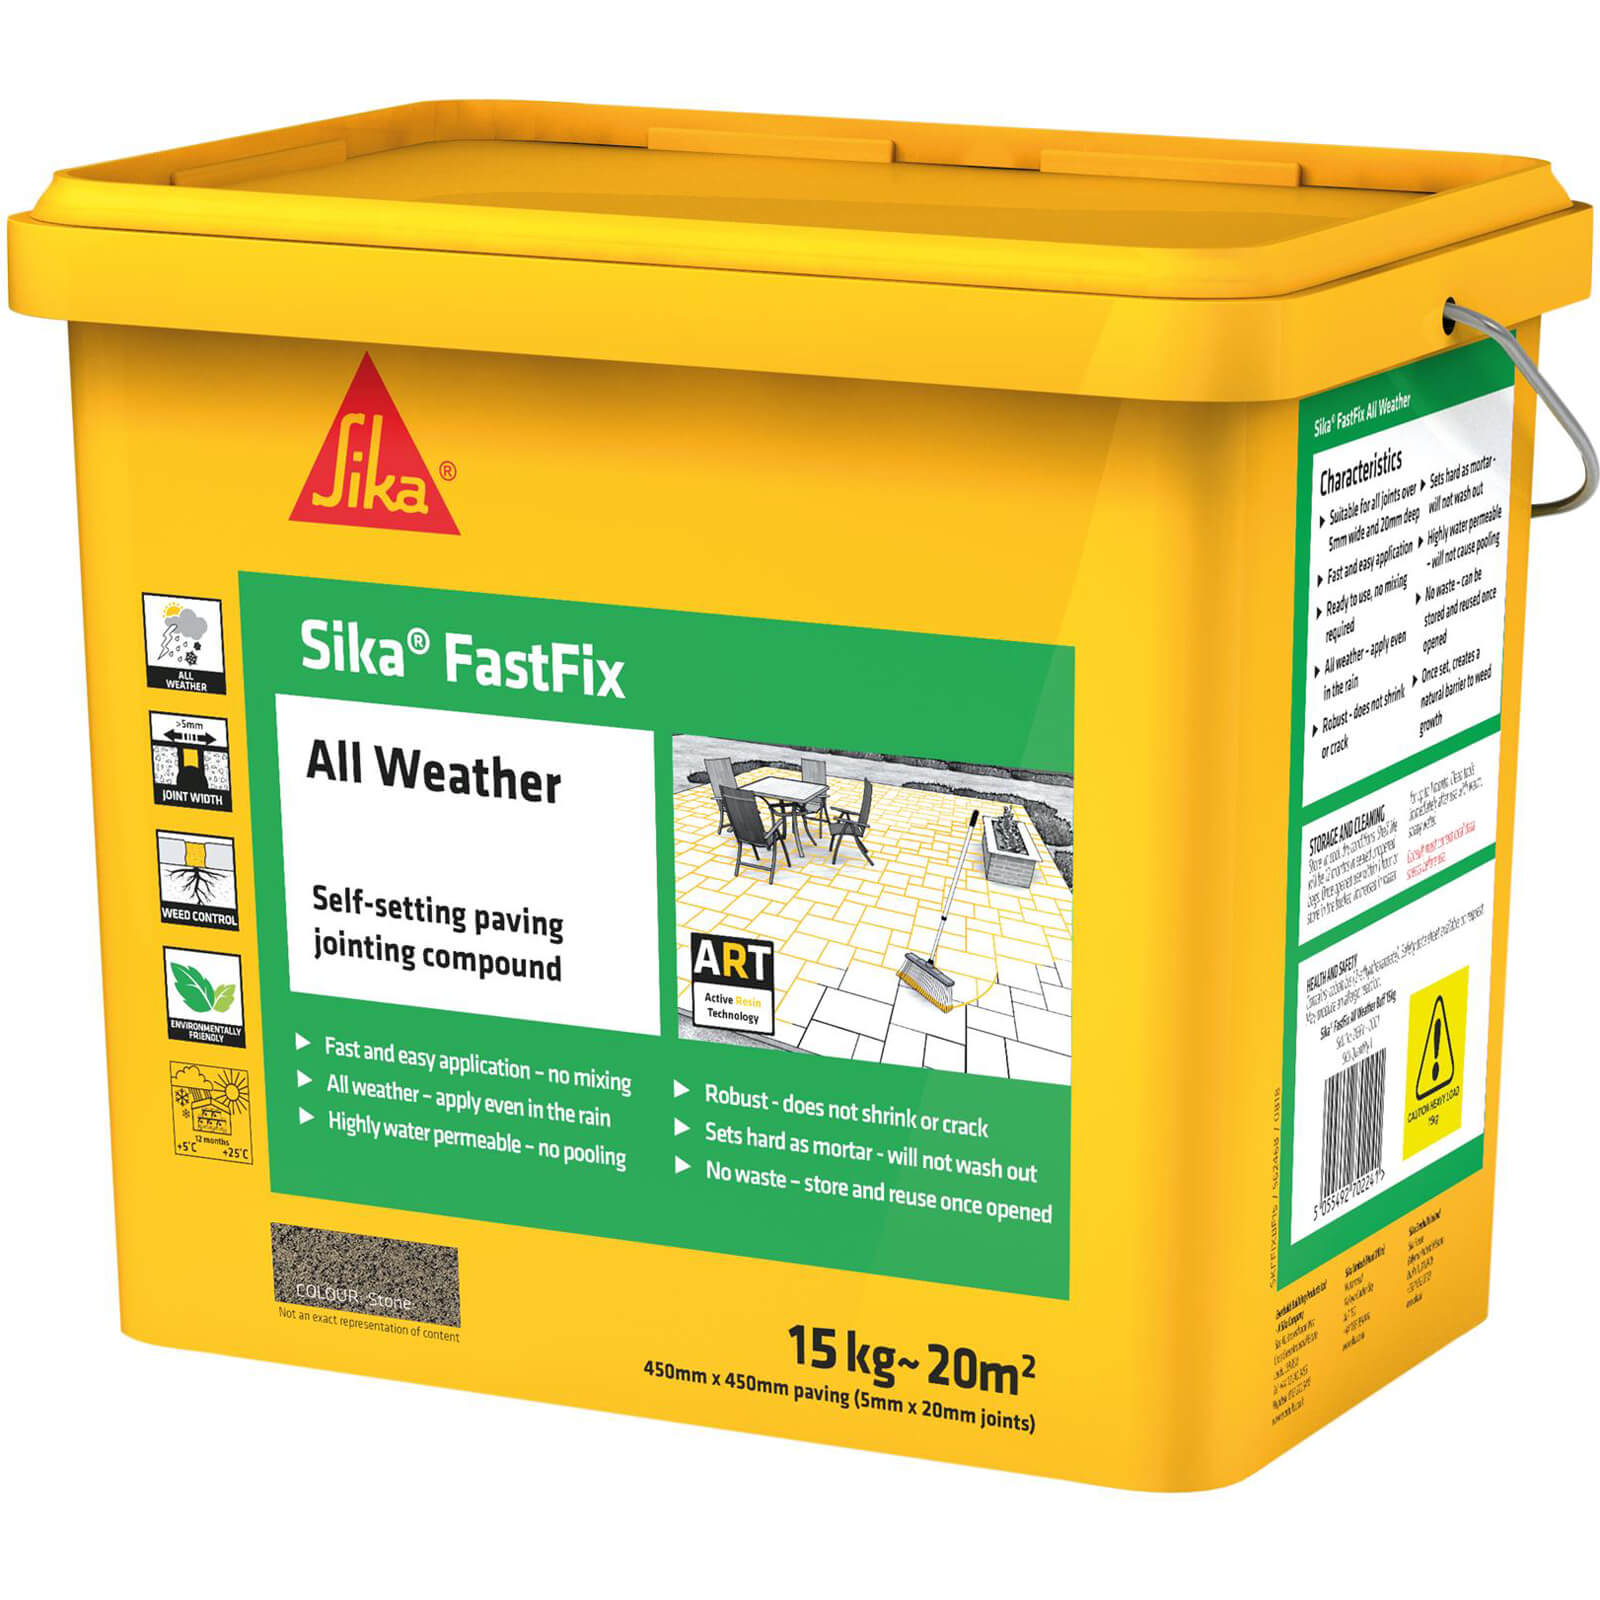 Everbuild Sika Fastfix All Weather Patio Jointing Compound Stone 15 Kg